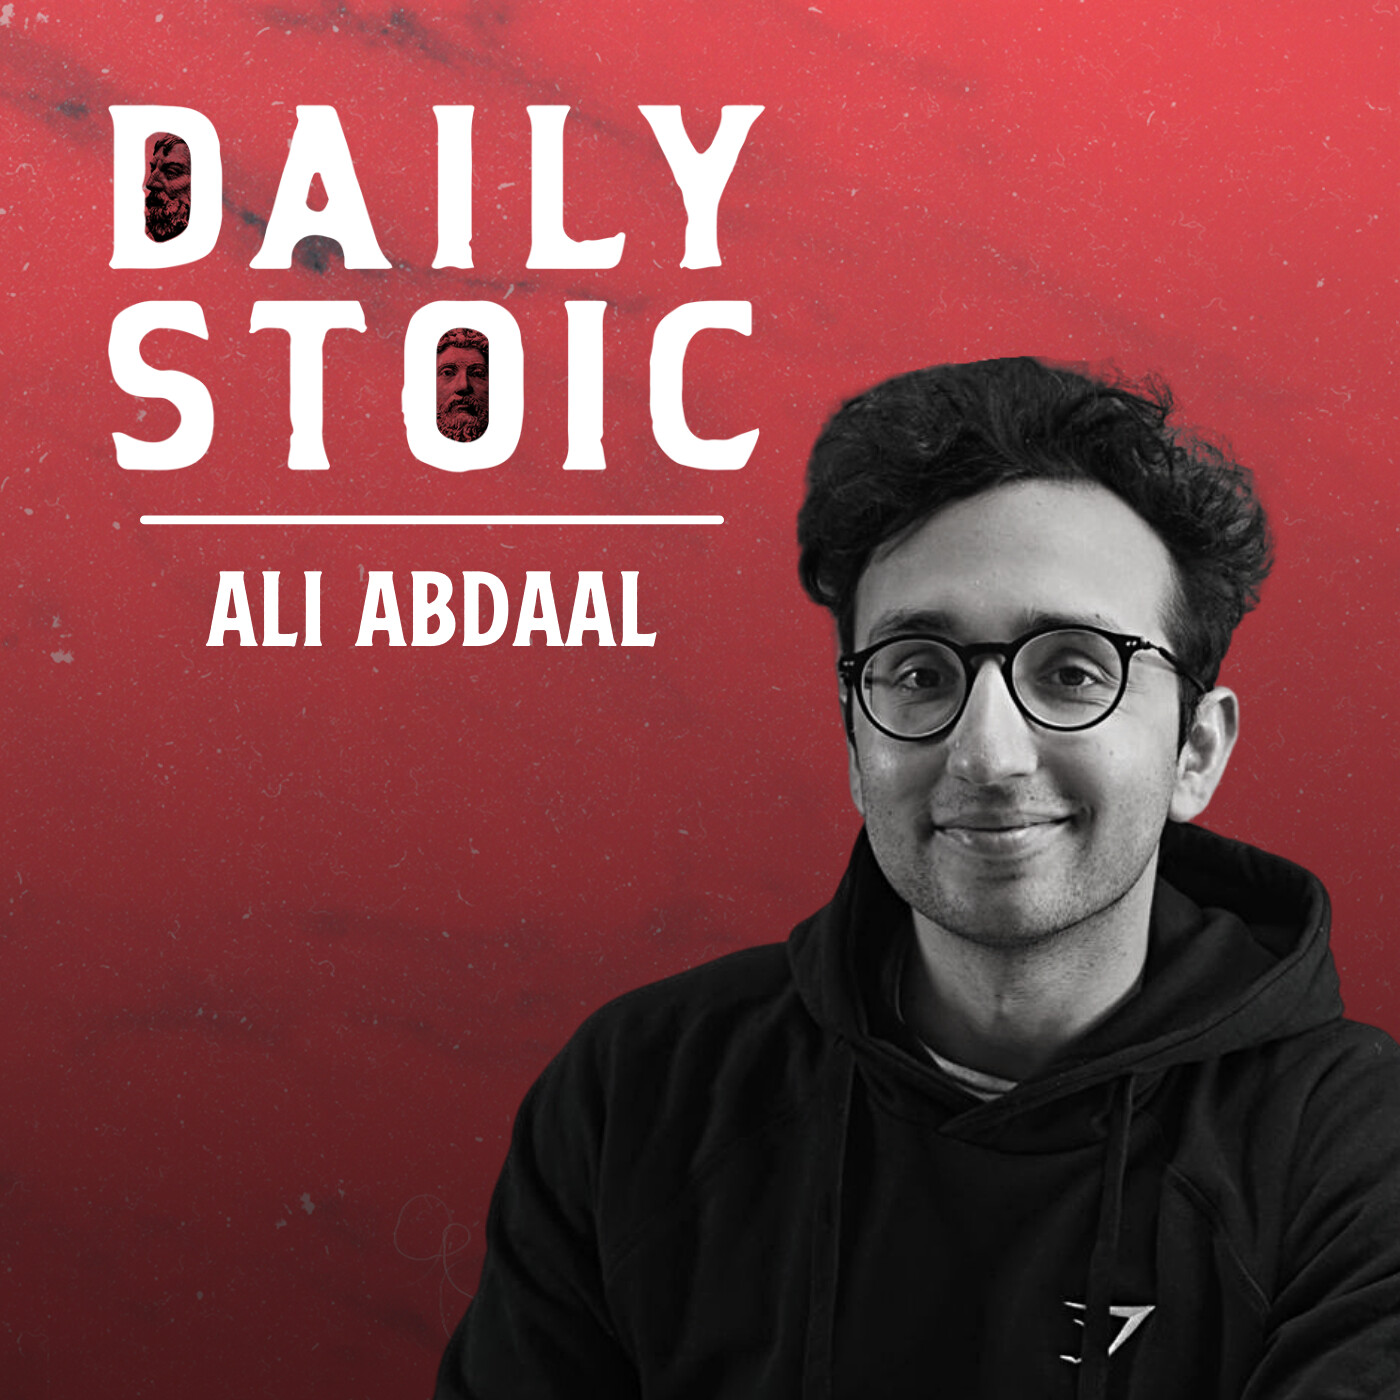 YouTube Superstar Ali Abdaal on Productivity and Essentialism